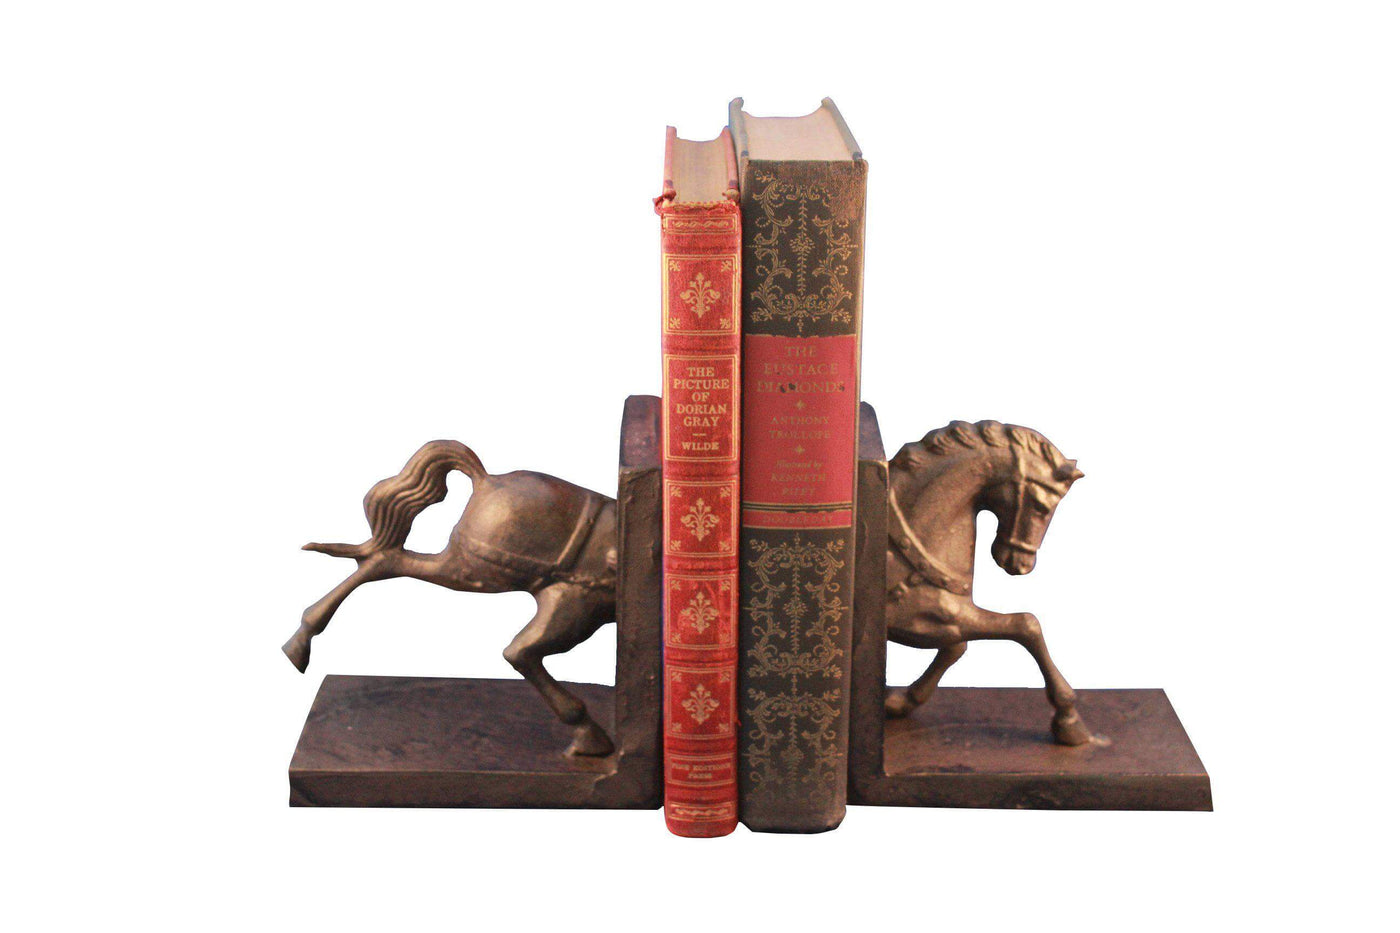 Horse Running Bookends - Metal - Pair - Carousel Style in partnership with Rustic Deco Incorporated